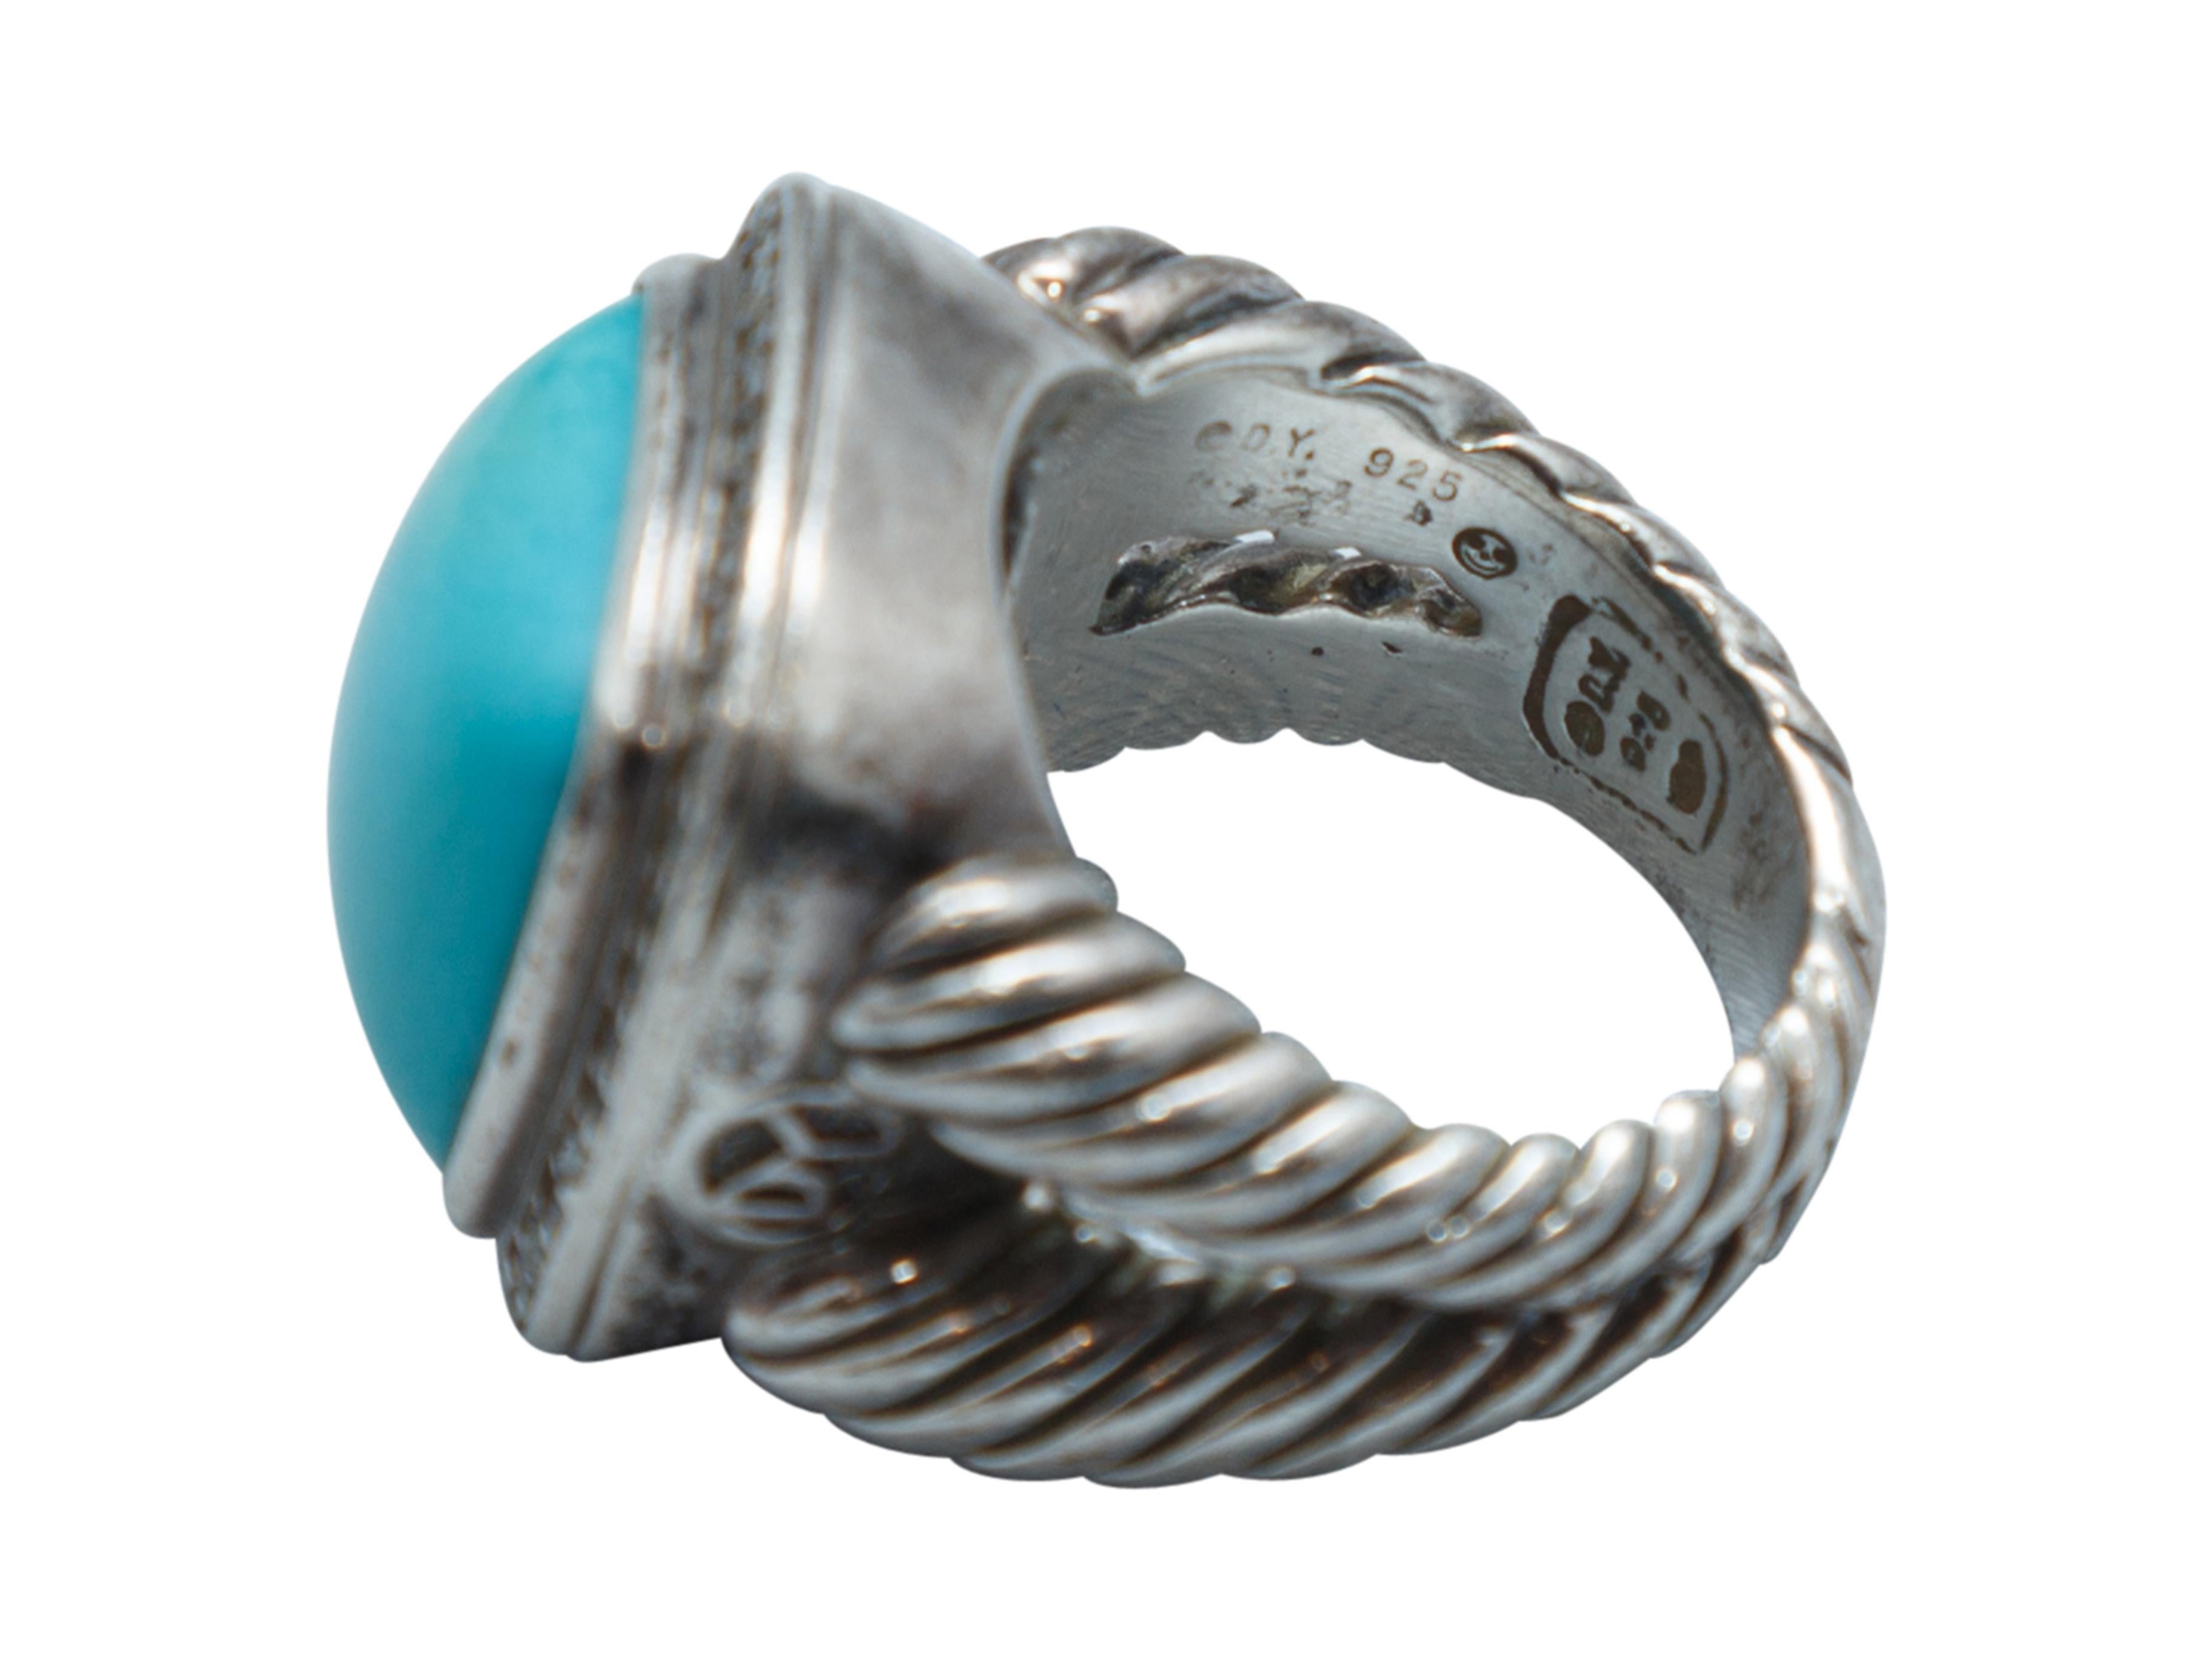 Product details: Sterling silver statement ring by David Yurman. Turquoise stone at center surrounded by diamonds. 1